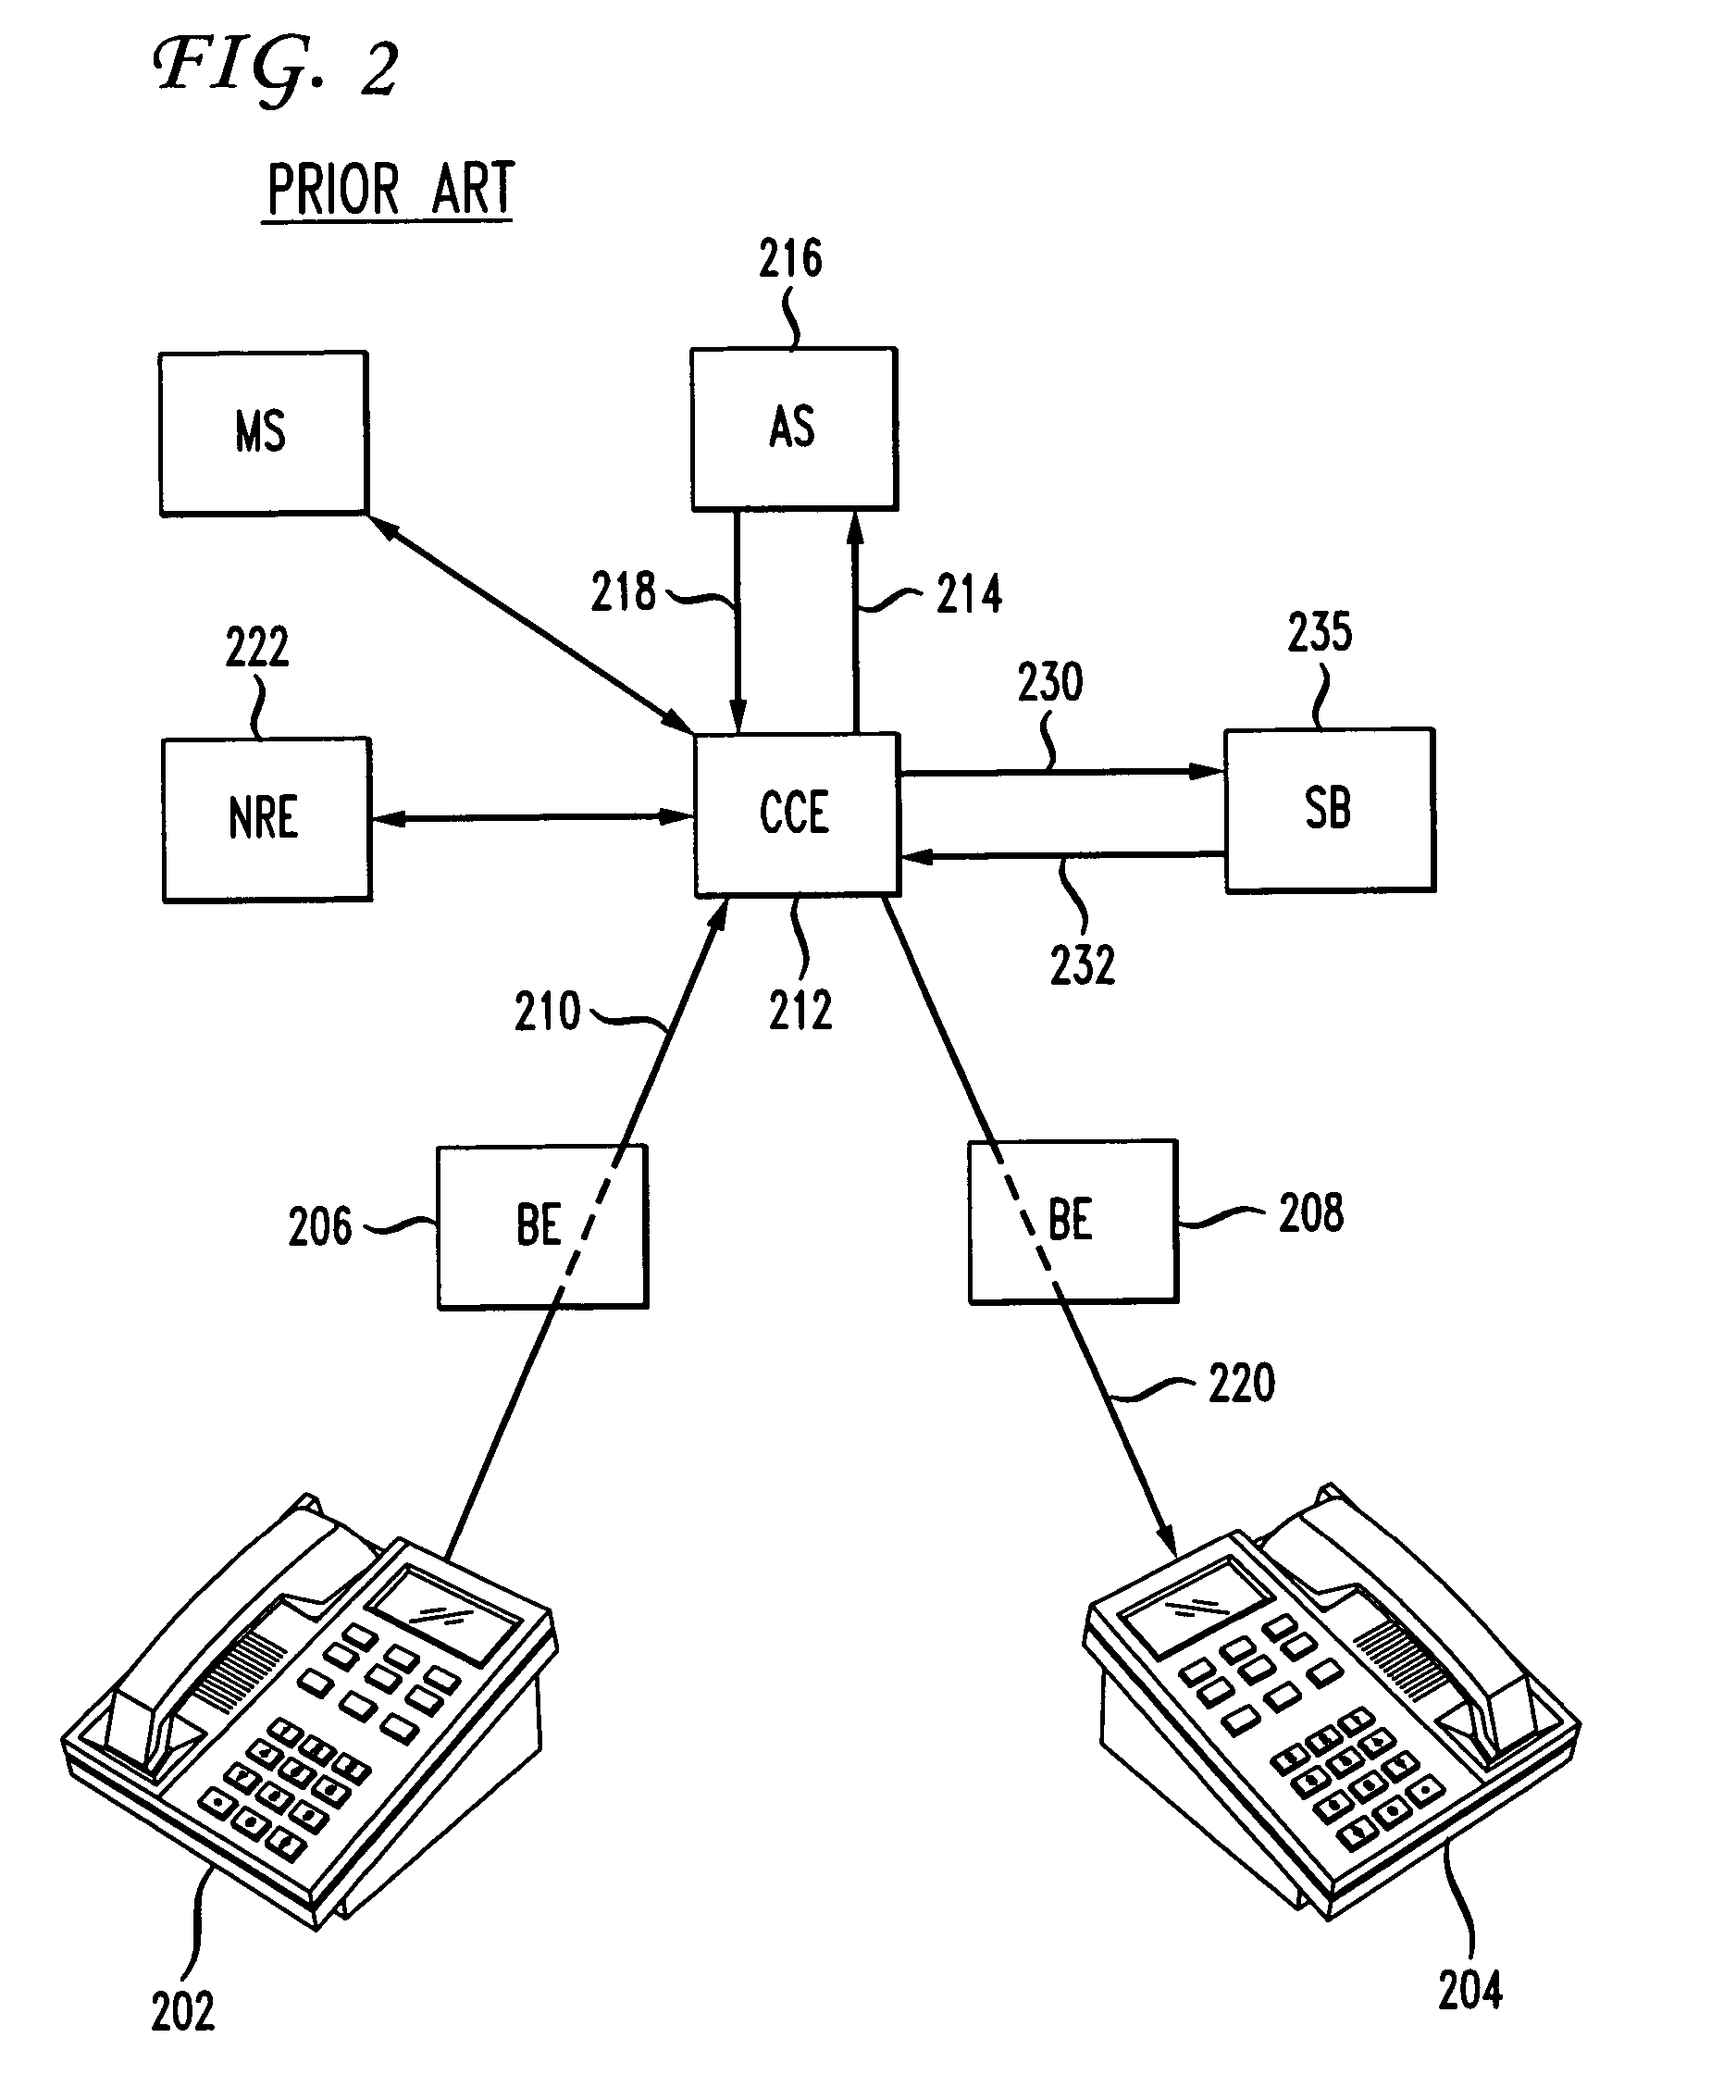 Method for providing terminating services treatment for calls terminating in an IP network